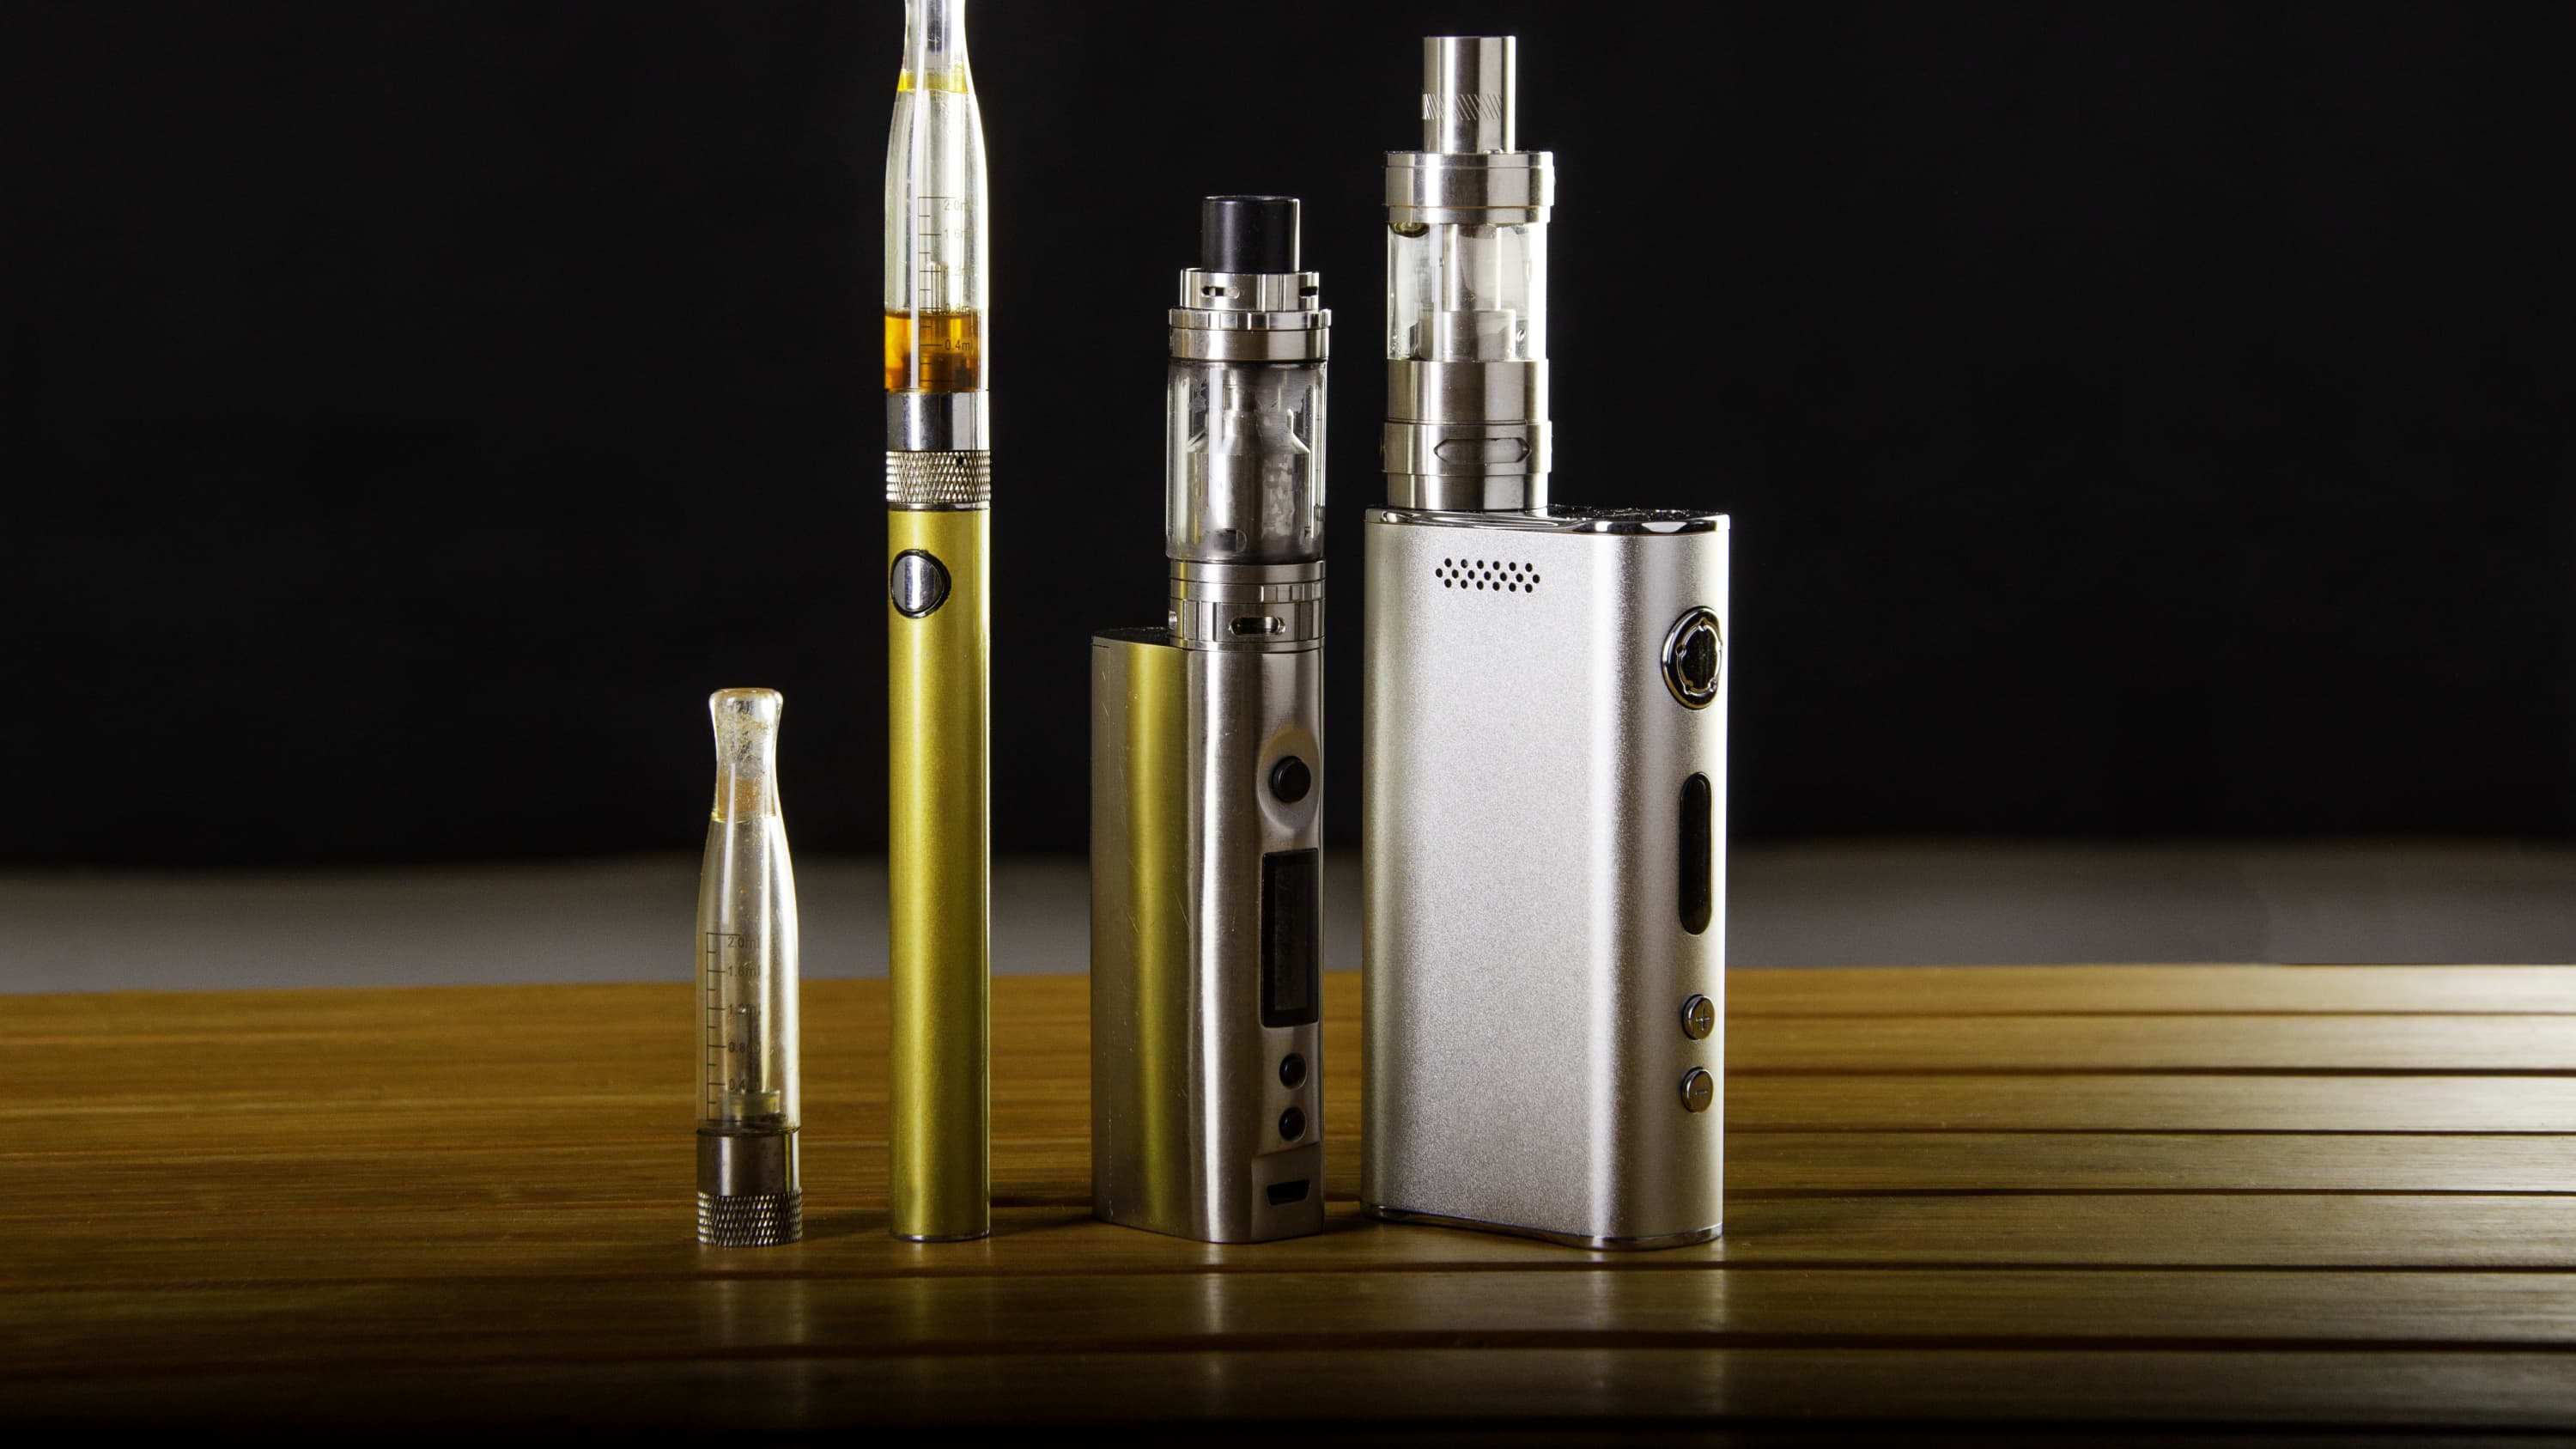 vaping devices, which may lead to EVALI